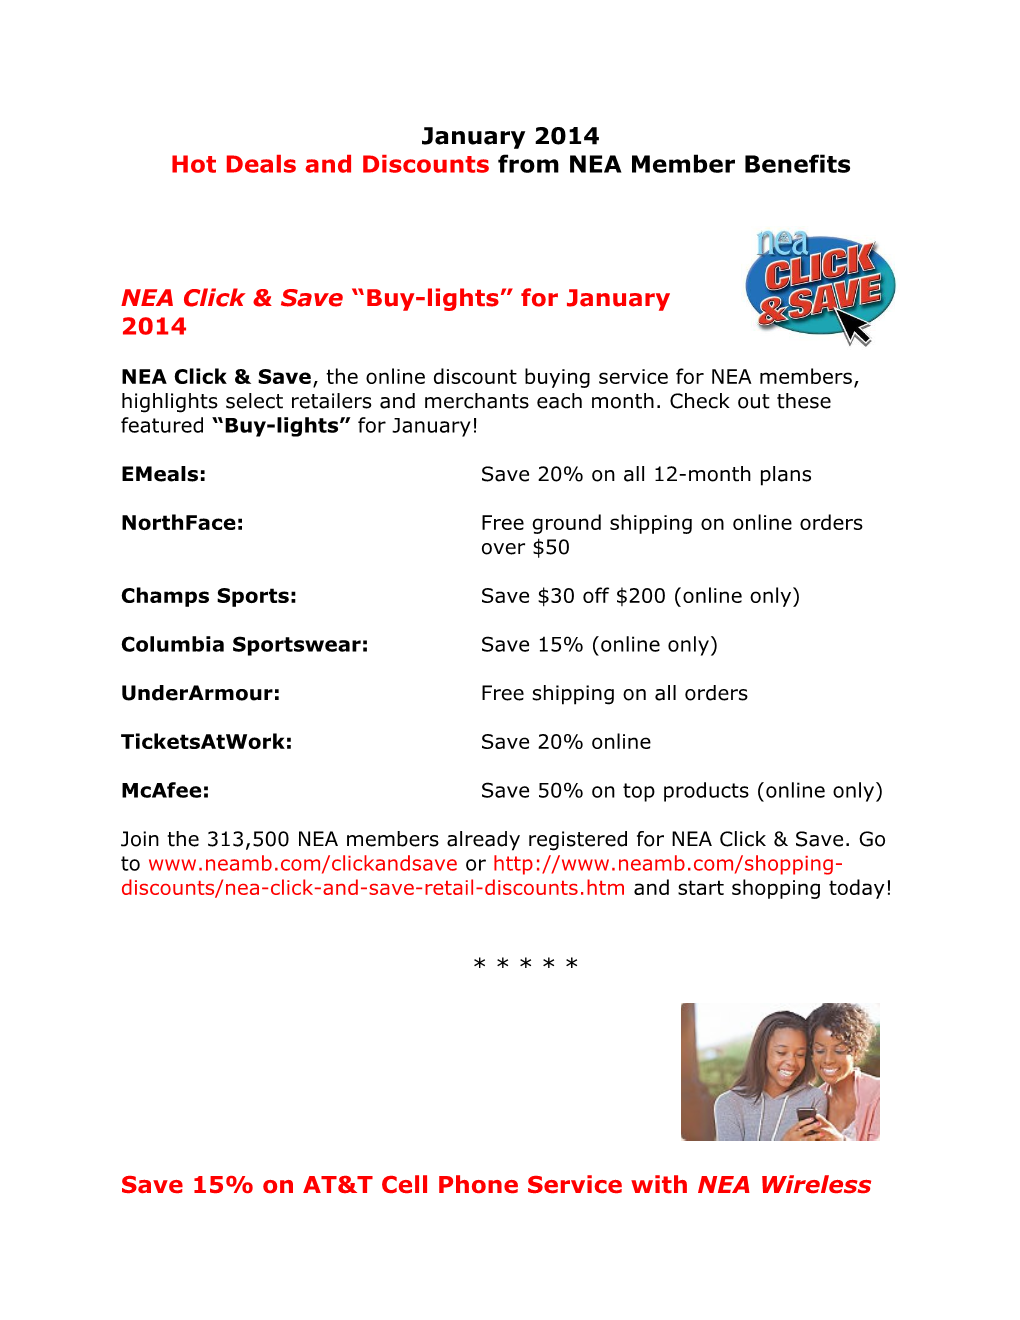 Hot Deals and Discounts from NEA Member Benefits